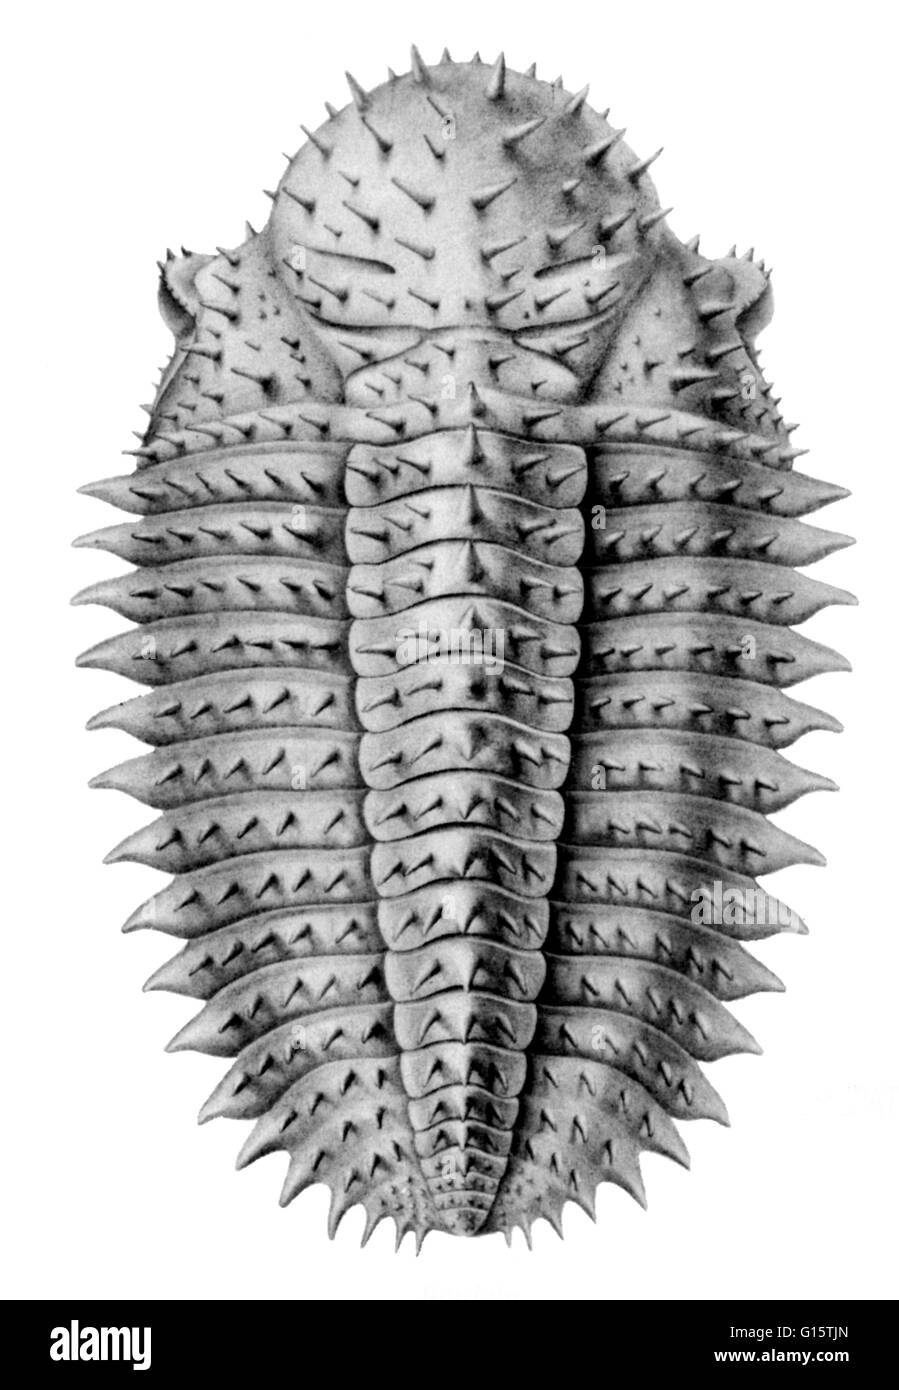 A trilobite is an extinct, small arthropod of the subphylum Trilobita that lived during the Paleozoic Era and are extremely common as fossils. Trilobites had a hard outer covering divided into three lengthwise and three widthwise sections (segmented exosk Stock Photo